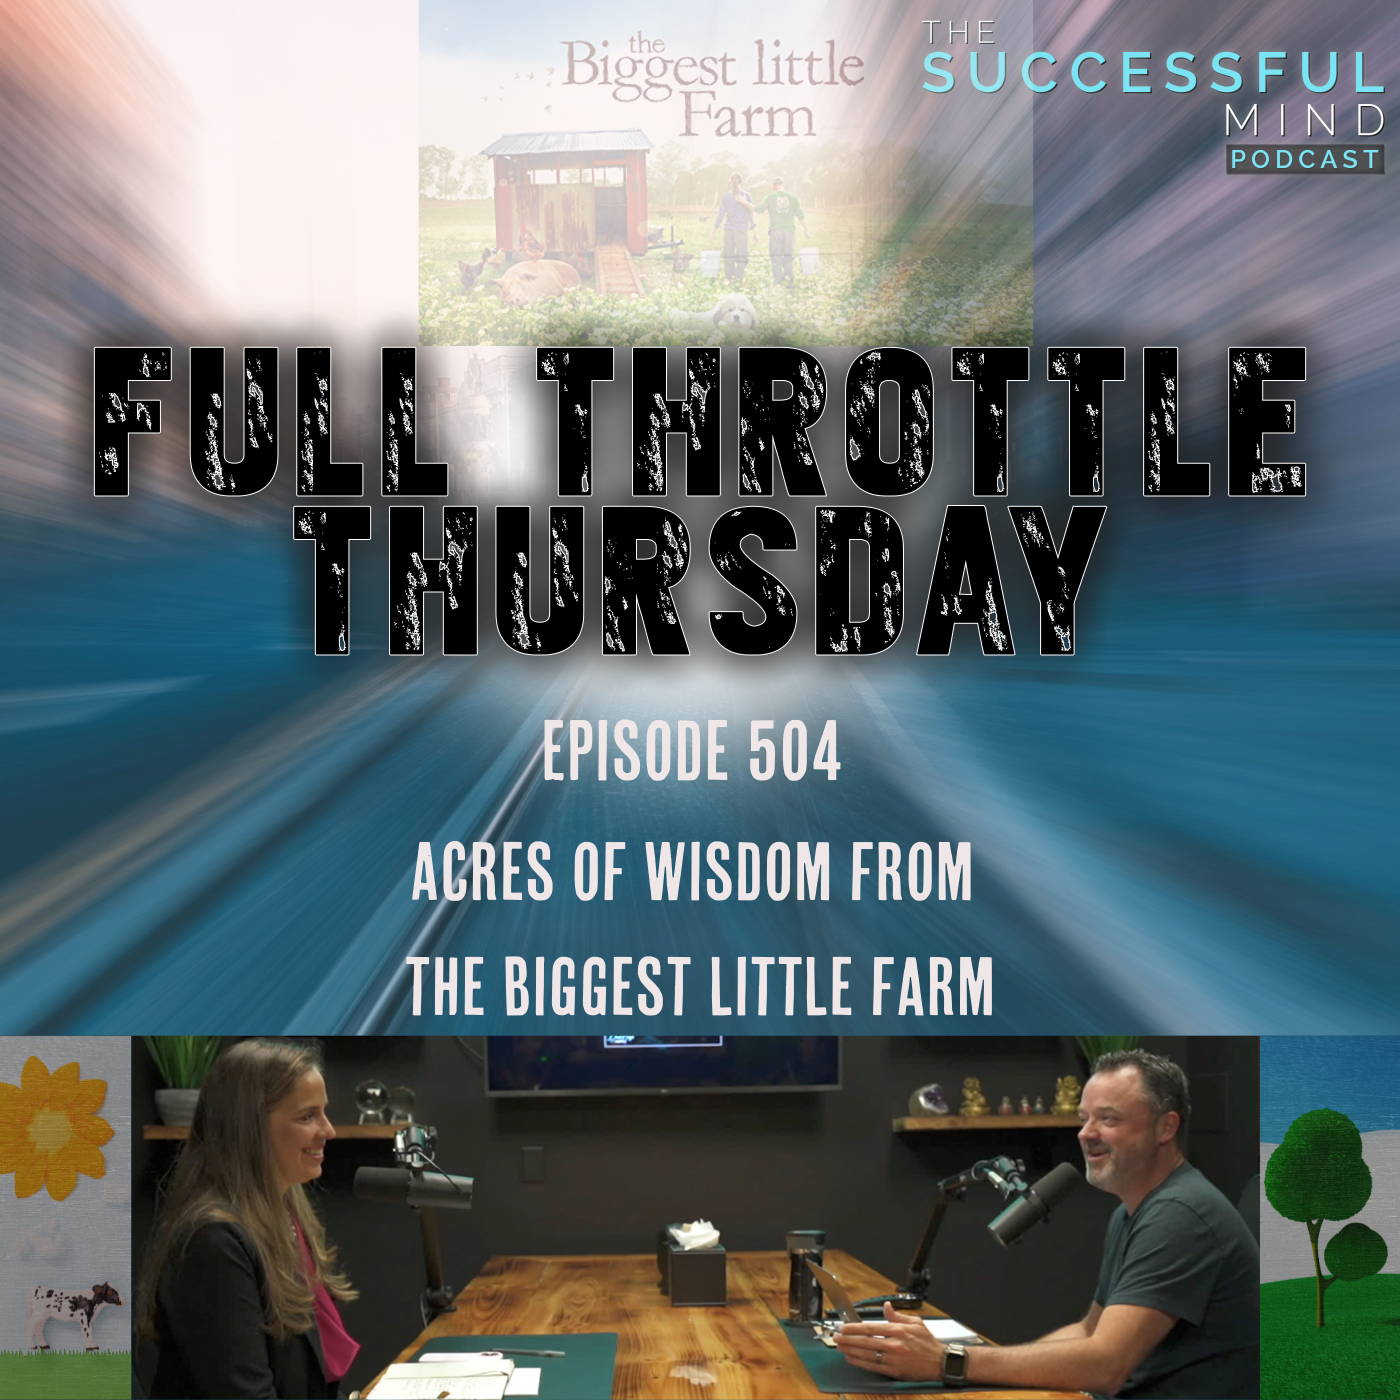 The Successful Mind Podcast - Full Throttle Thursday - Acres of Wisdom from The Biggest Little Farm